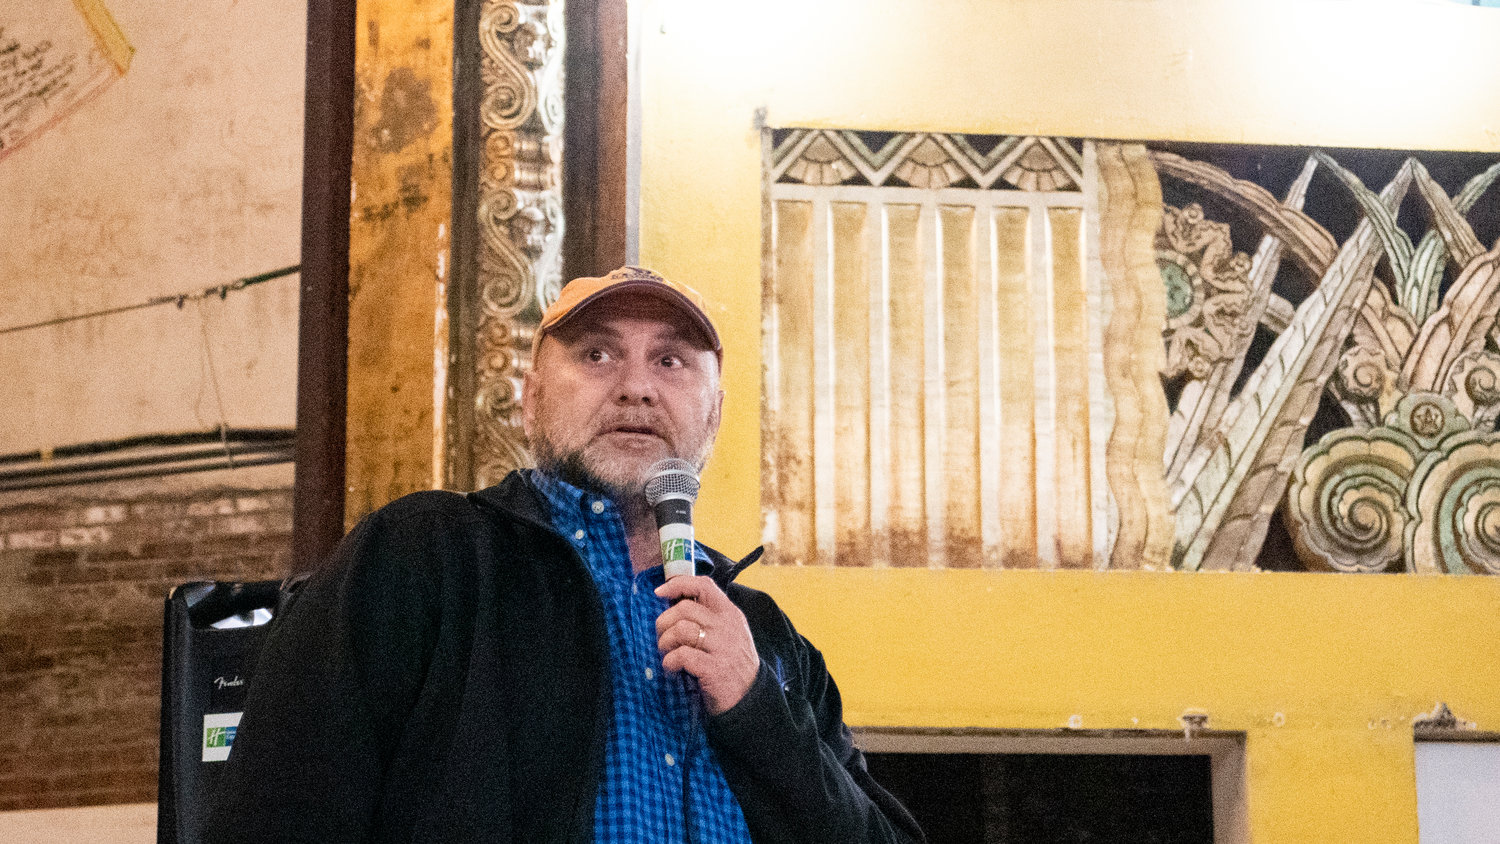 Todd Chaput talks about ongoing projects at the Fox Theatre during a Centralia-Chehalis Chamber of Commerce Business After Hours event Thursday in Centralia.